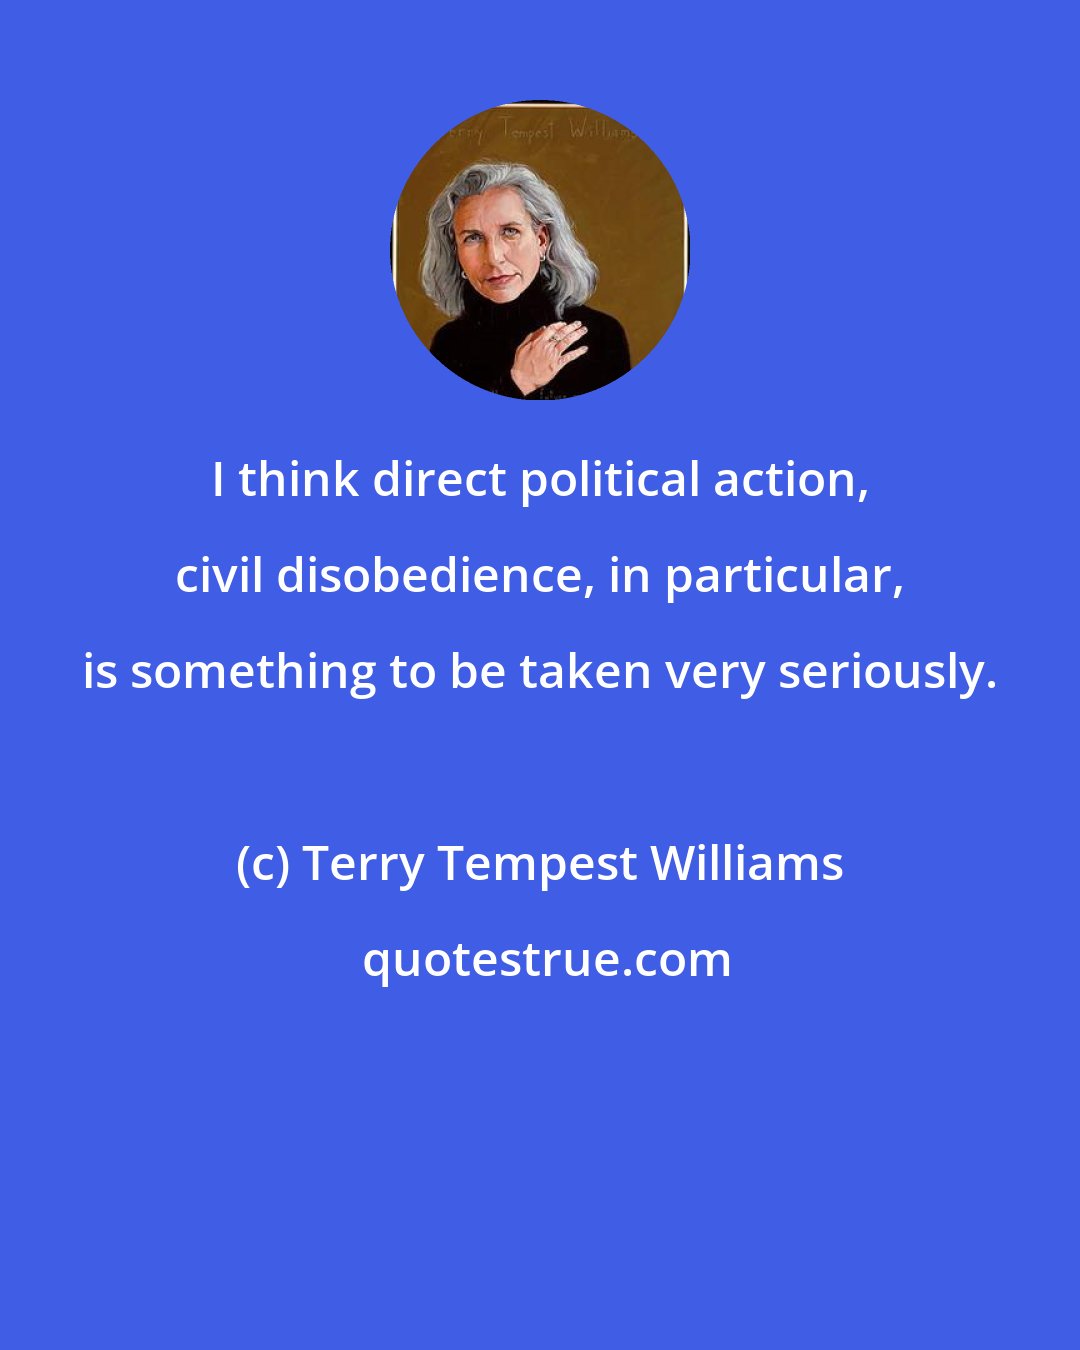 Terry Tempest Williams: I think direct political action, civil disobedience, in particular, is something to be taken very seriously.